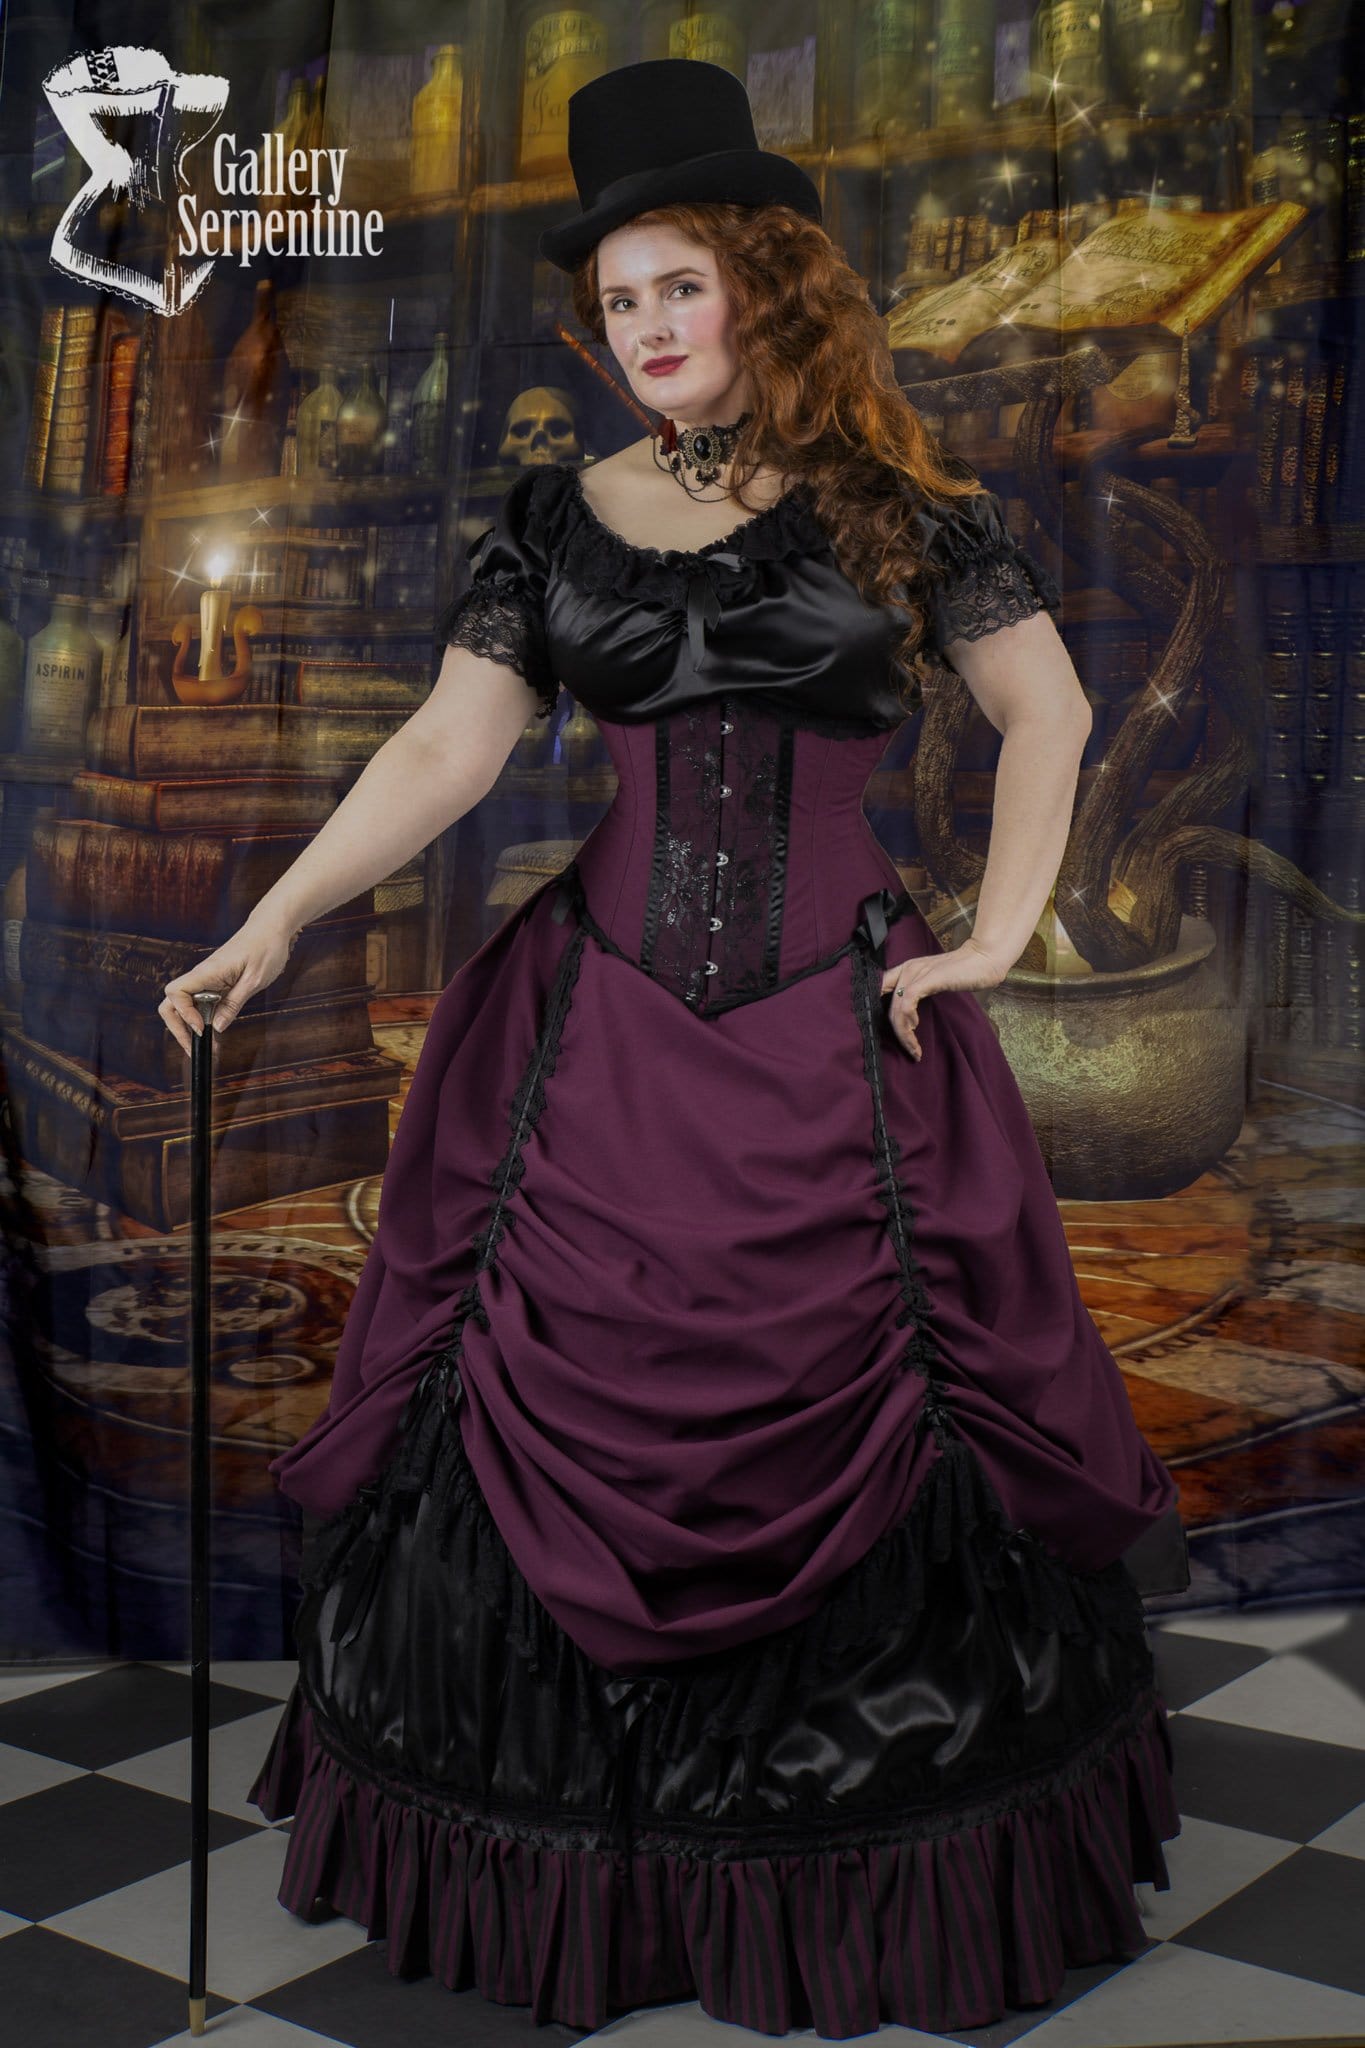 Made to Measure Burgundy Beauty Gothic Victorian Steampunk Corset Gown –  Gallery Serpentine